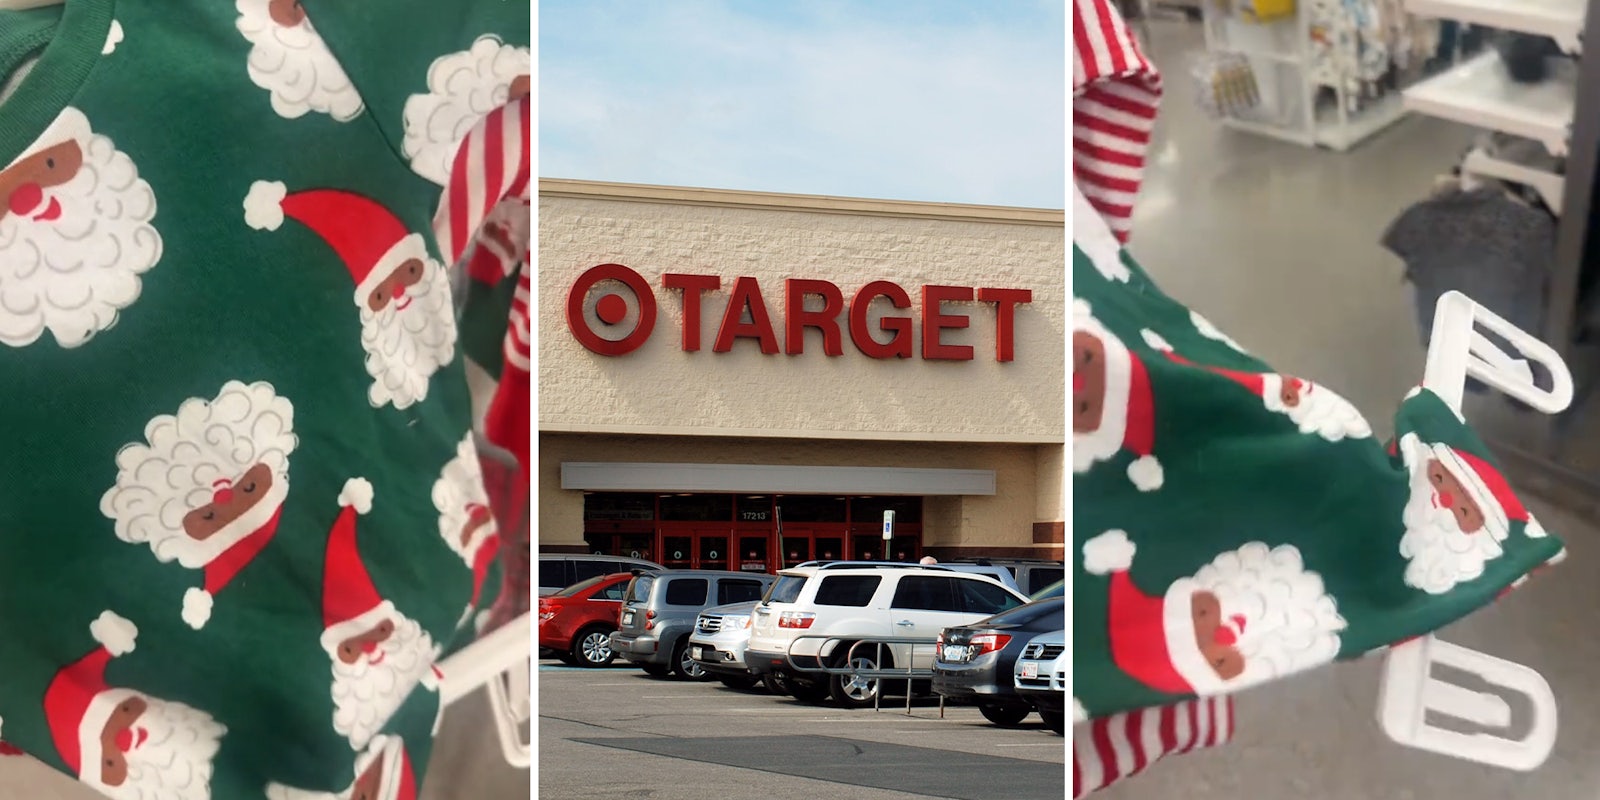 Woman slams shoplifters after outfit comes incomplete from Target